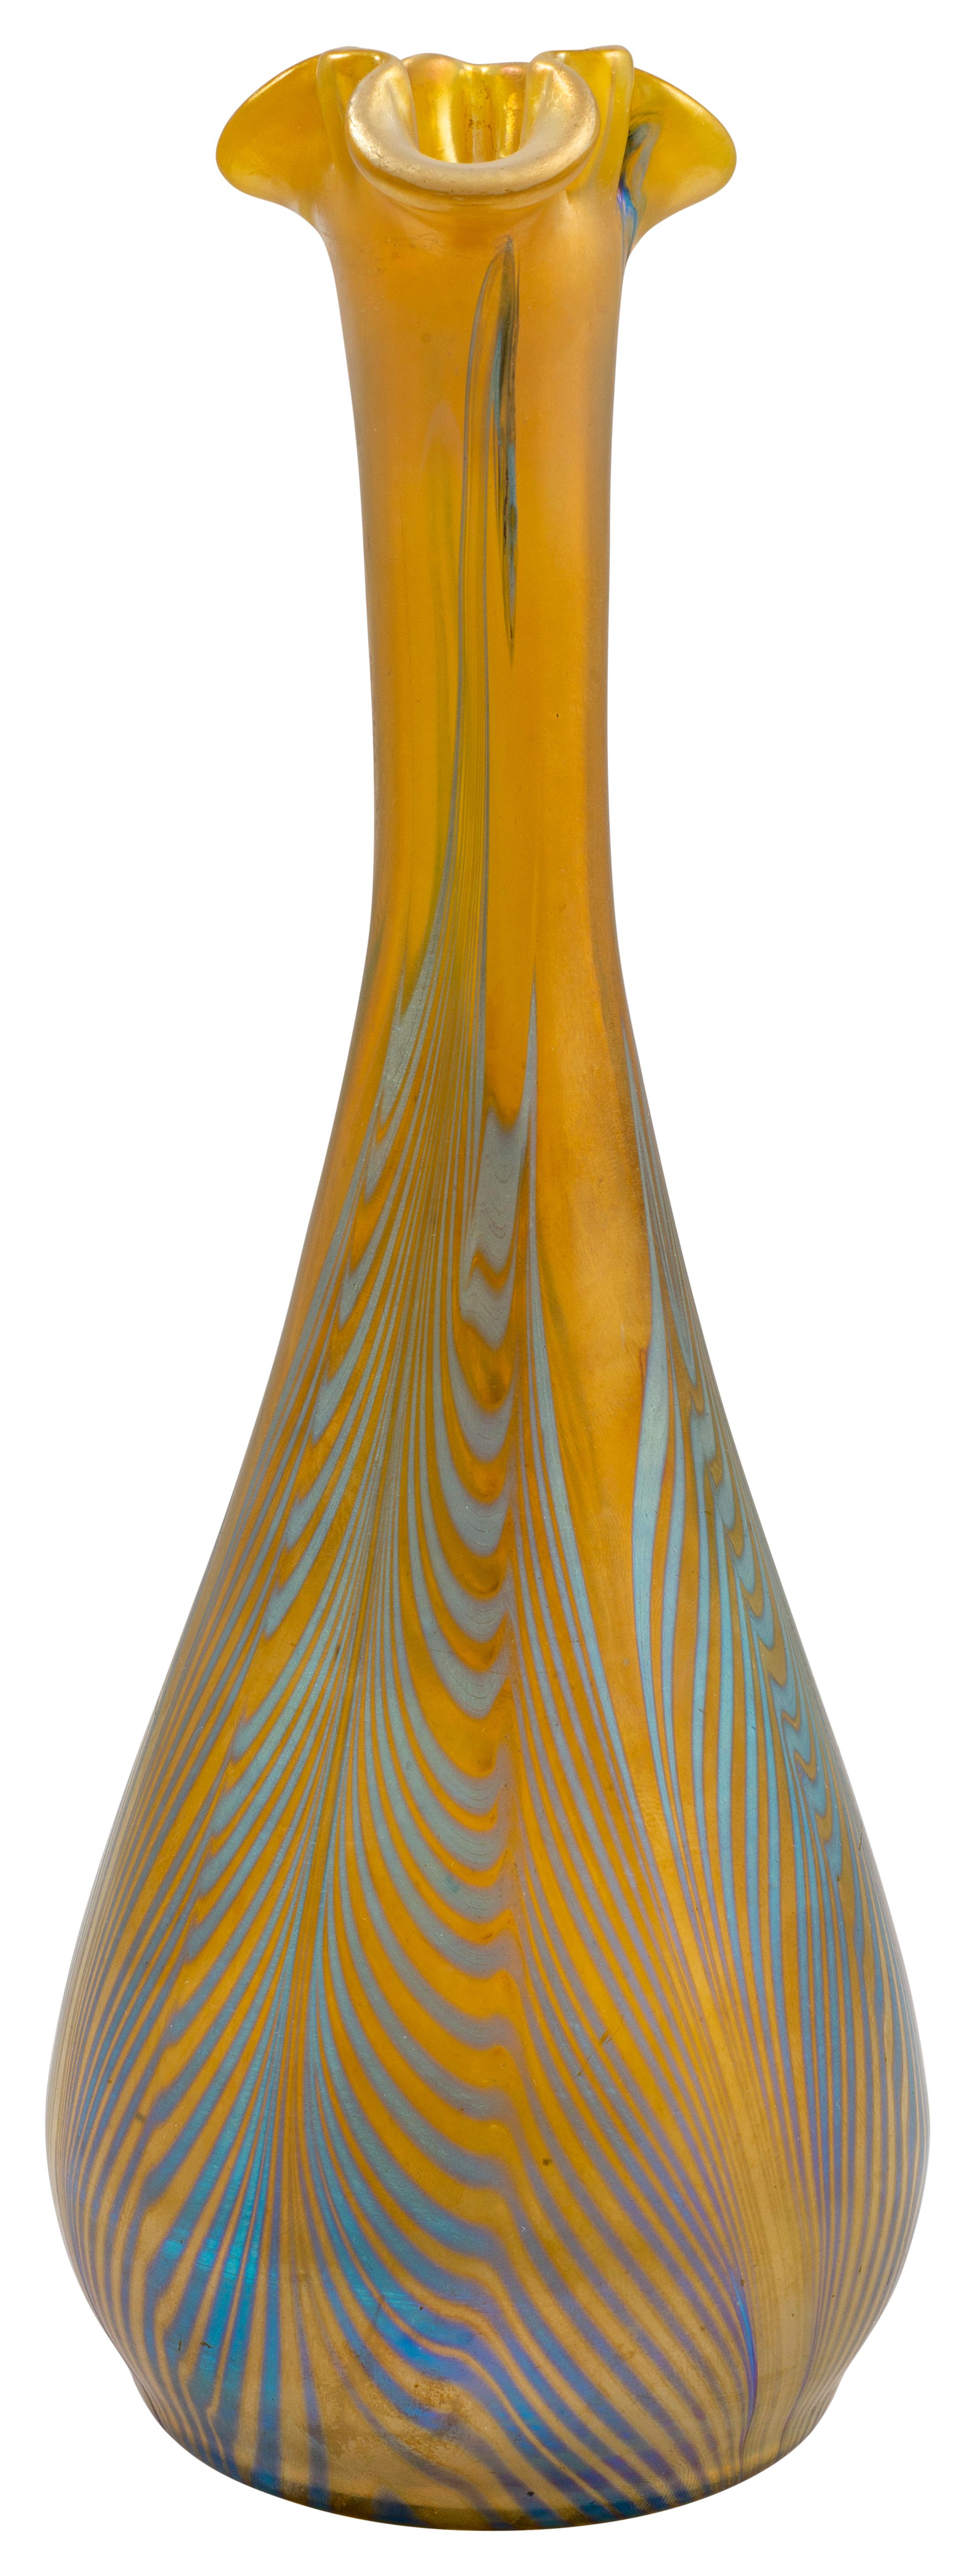 Vase Austrian Jugendstil Johann Loetz Witwe mouth-blown glass circa 1901 blue yellow PG 1/154

One of the main reasons for the big success of Loetz at the Paris World Exhibition in 1900 was the use of bright, colorful decorations later to be known